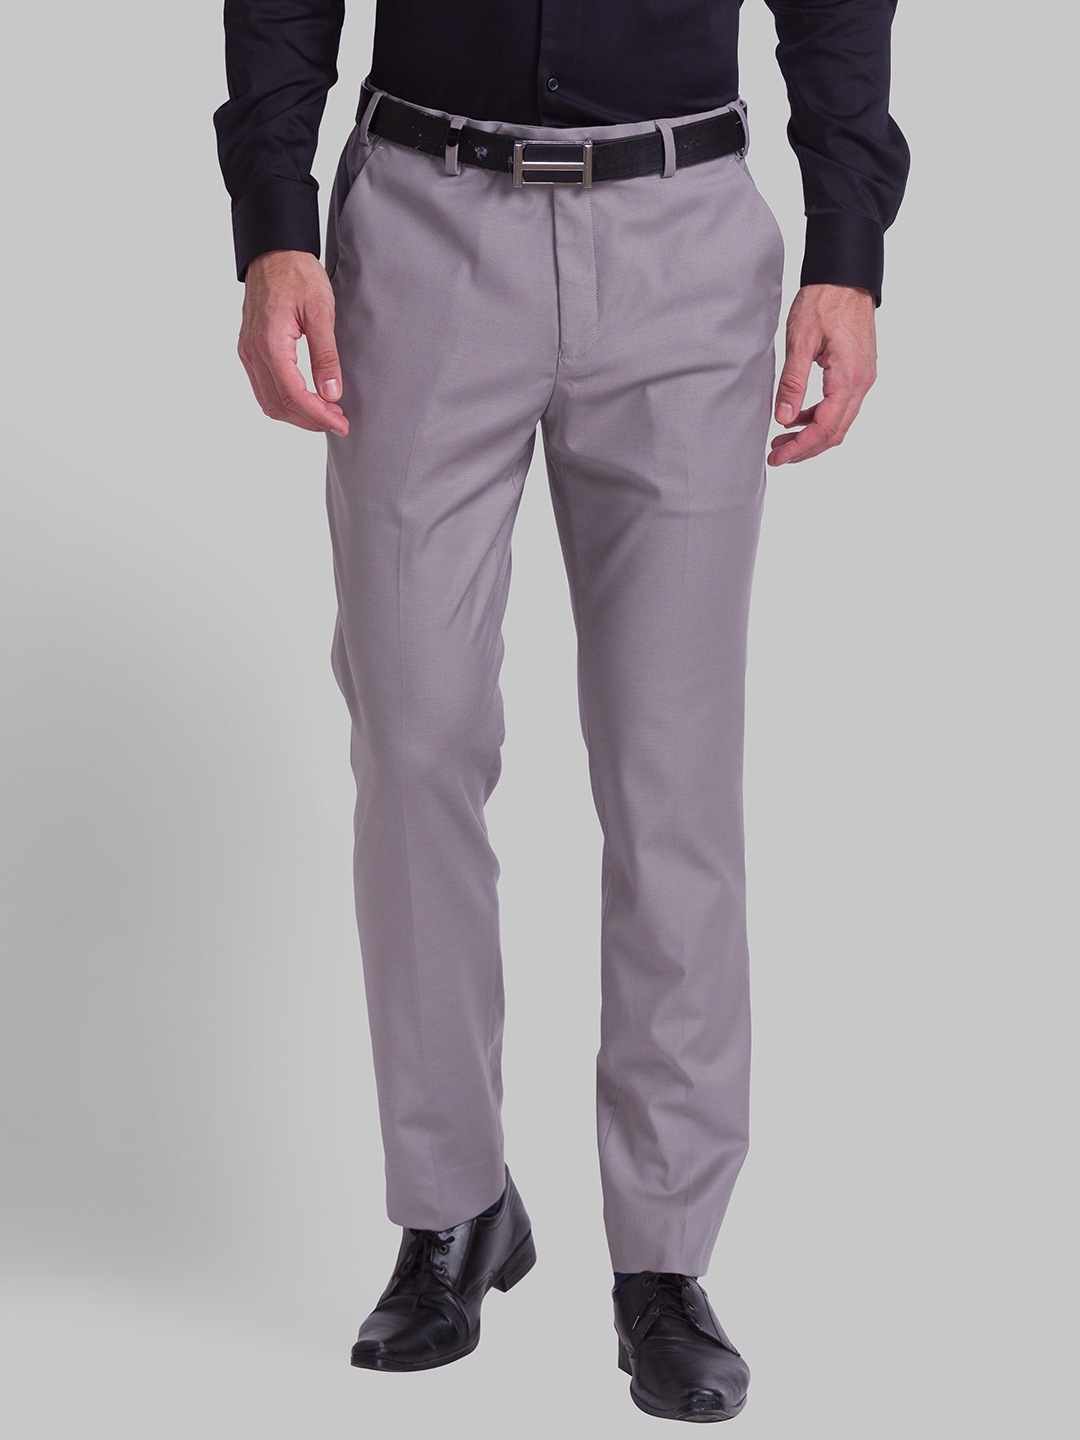 Mens Grey Formal Trousers | Charcoal Grey Formal Trousers | Next